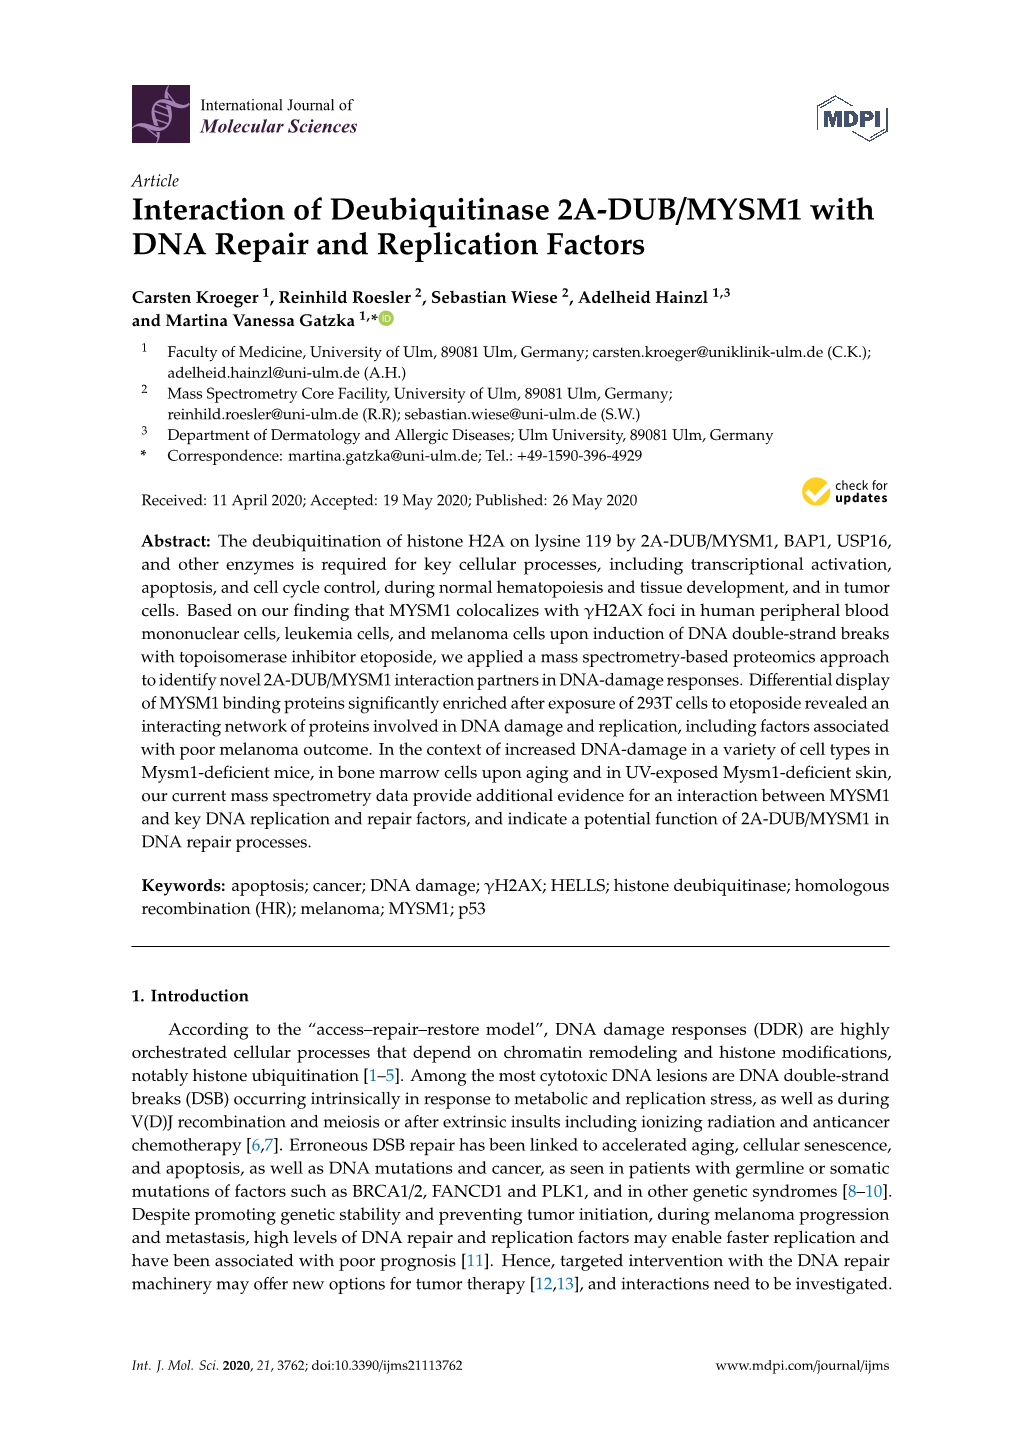 Interaction of Deubiquitinase 2A-DUB/MYSM1 with DNA Repair and Replication Factors